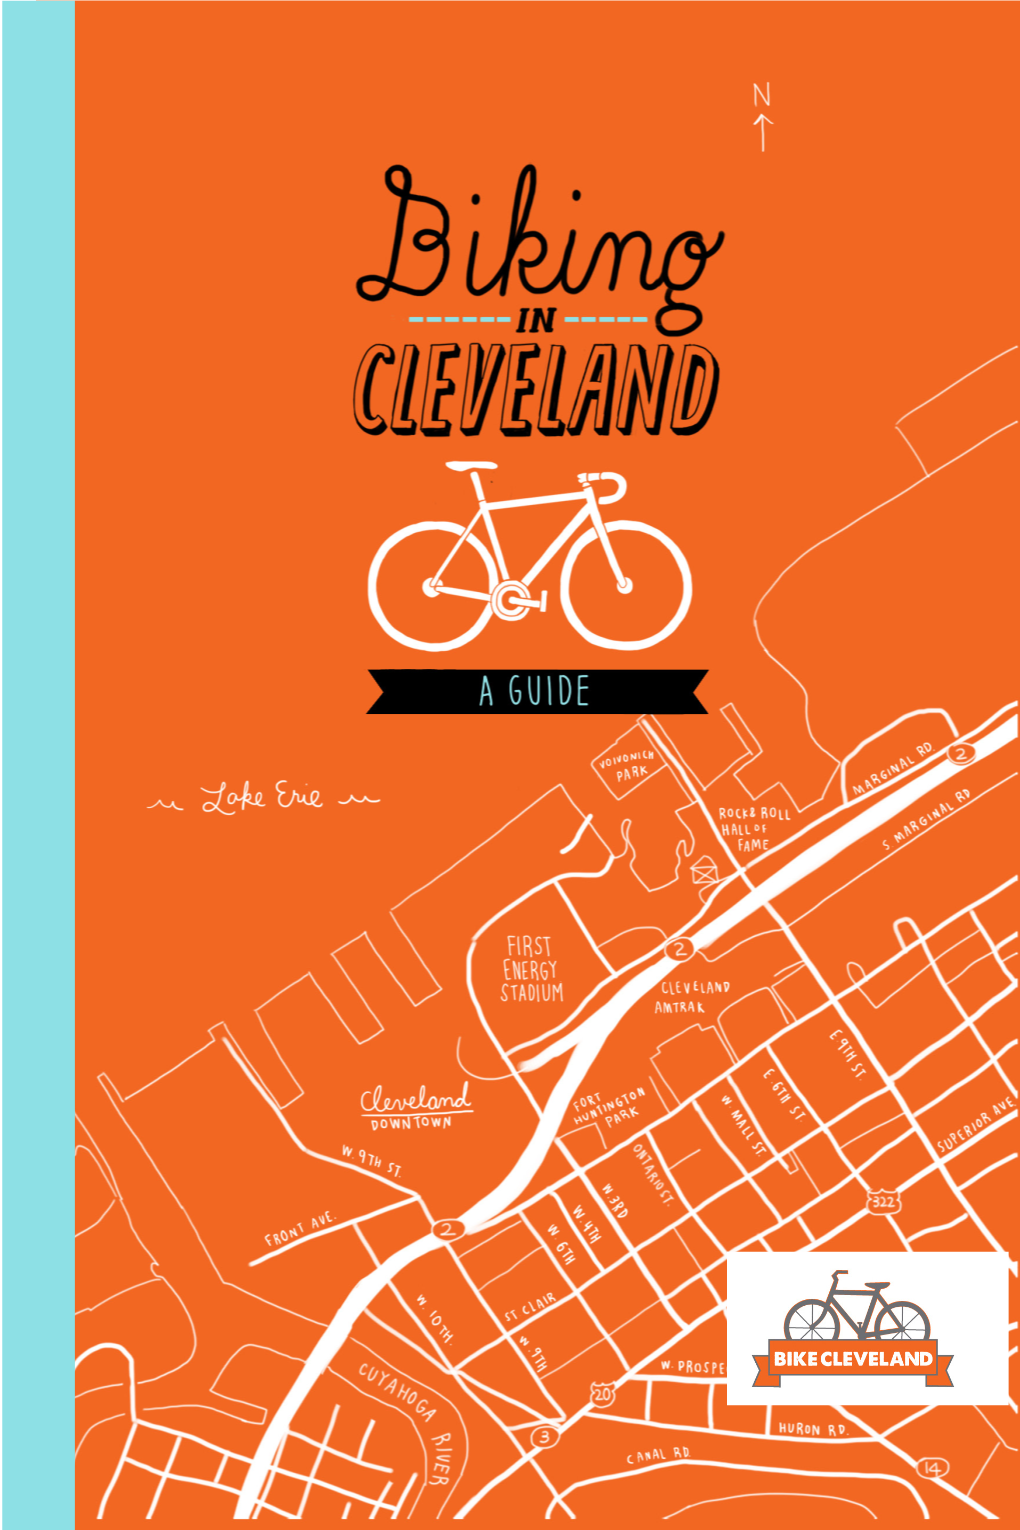 Biking in Cleveland: a Guide Is Here to Help You Take the Next Step Towards About Climate Change